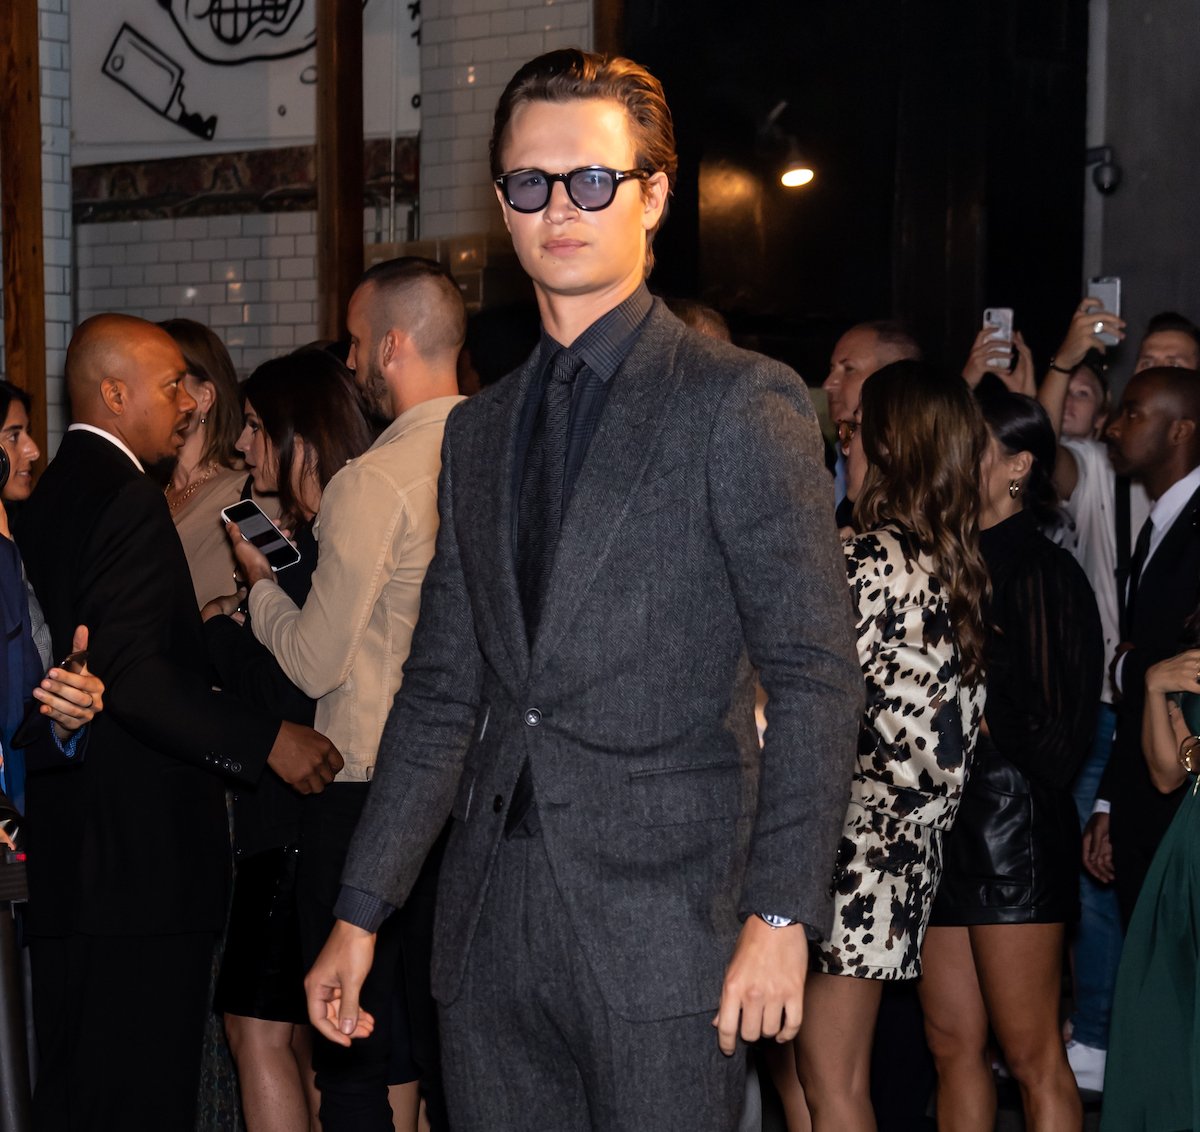 Actor Ansel Elgort is seen arriving to Tom Ford fashion show in 2019 in New York City